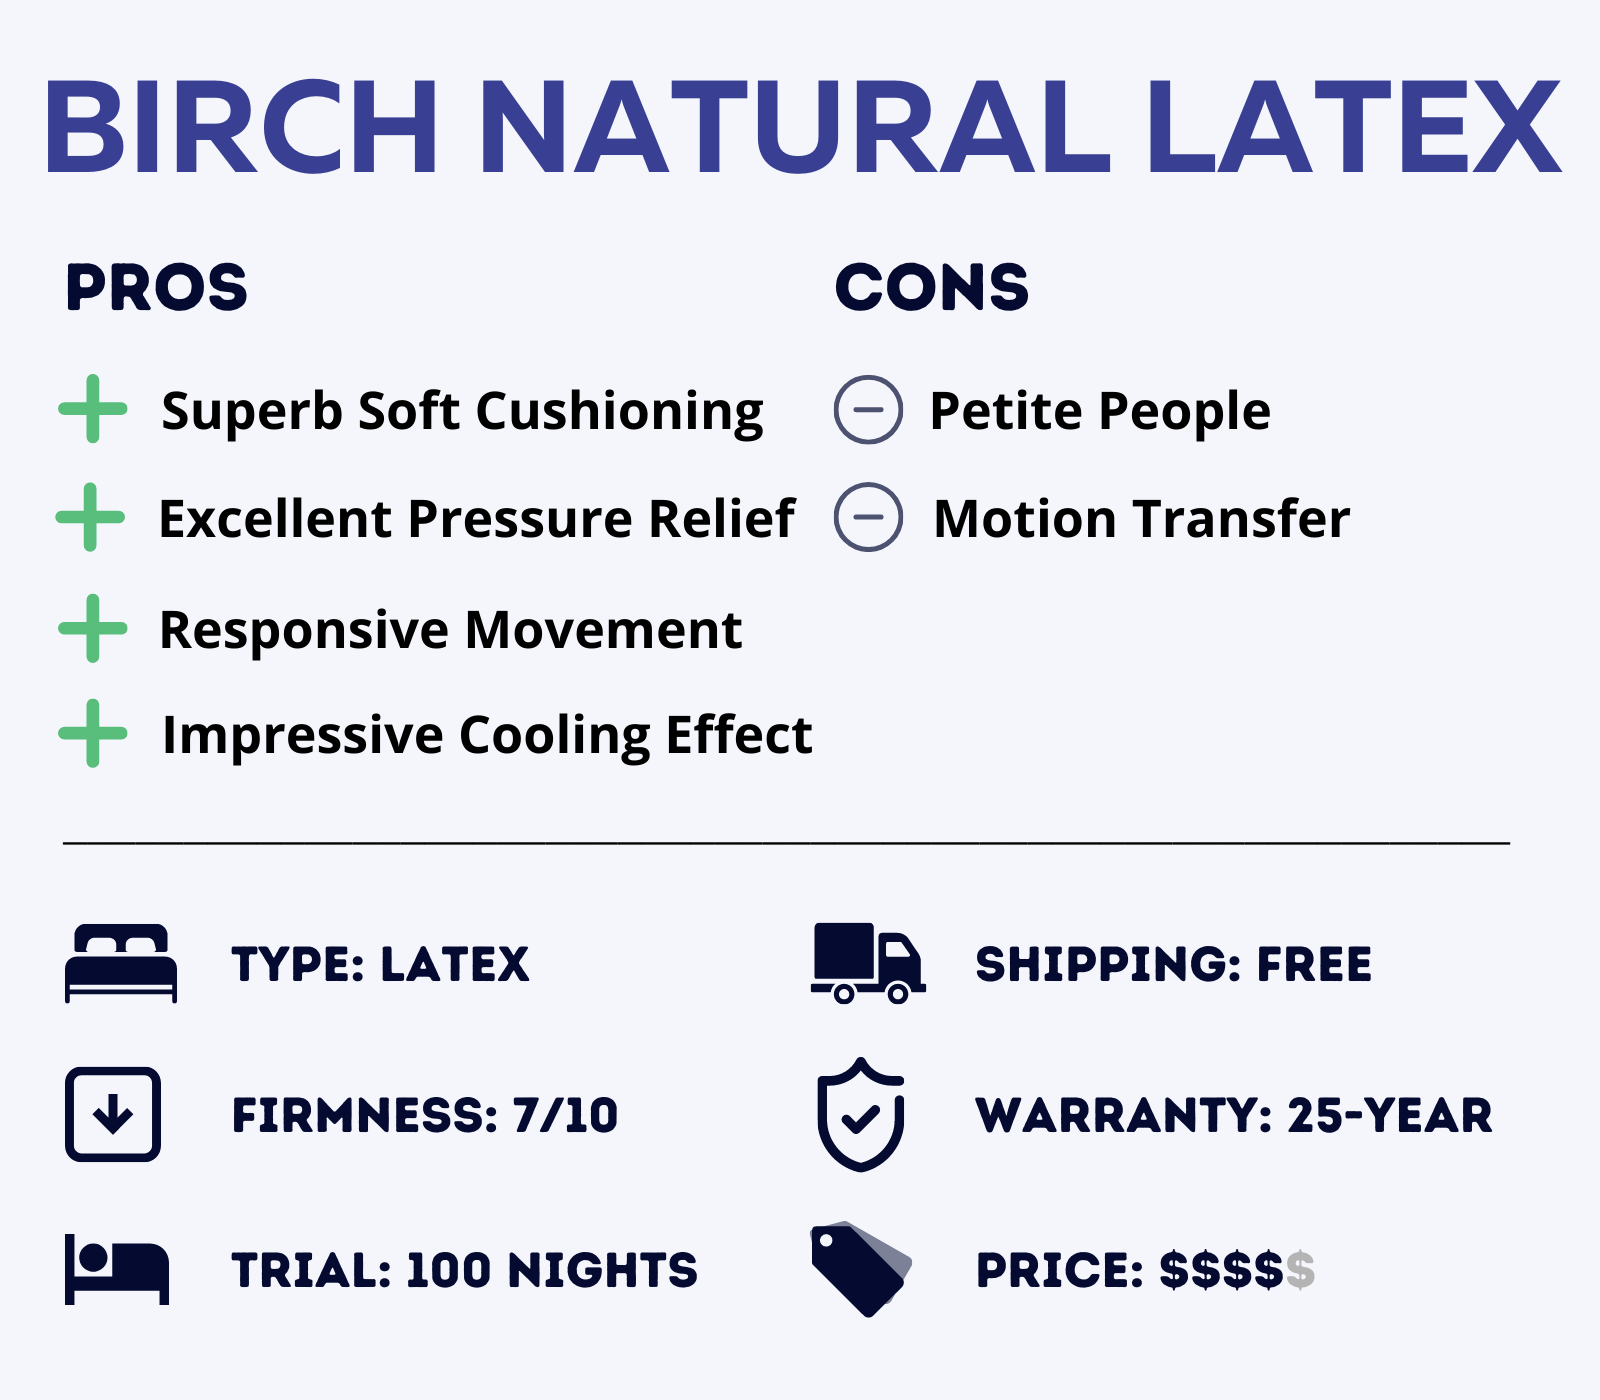 Birch Natural Latex Mattress Features and Overview